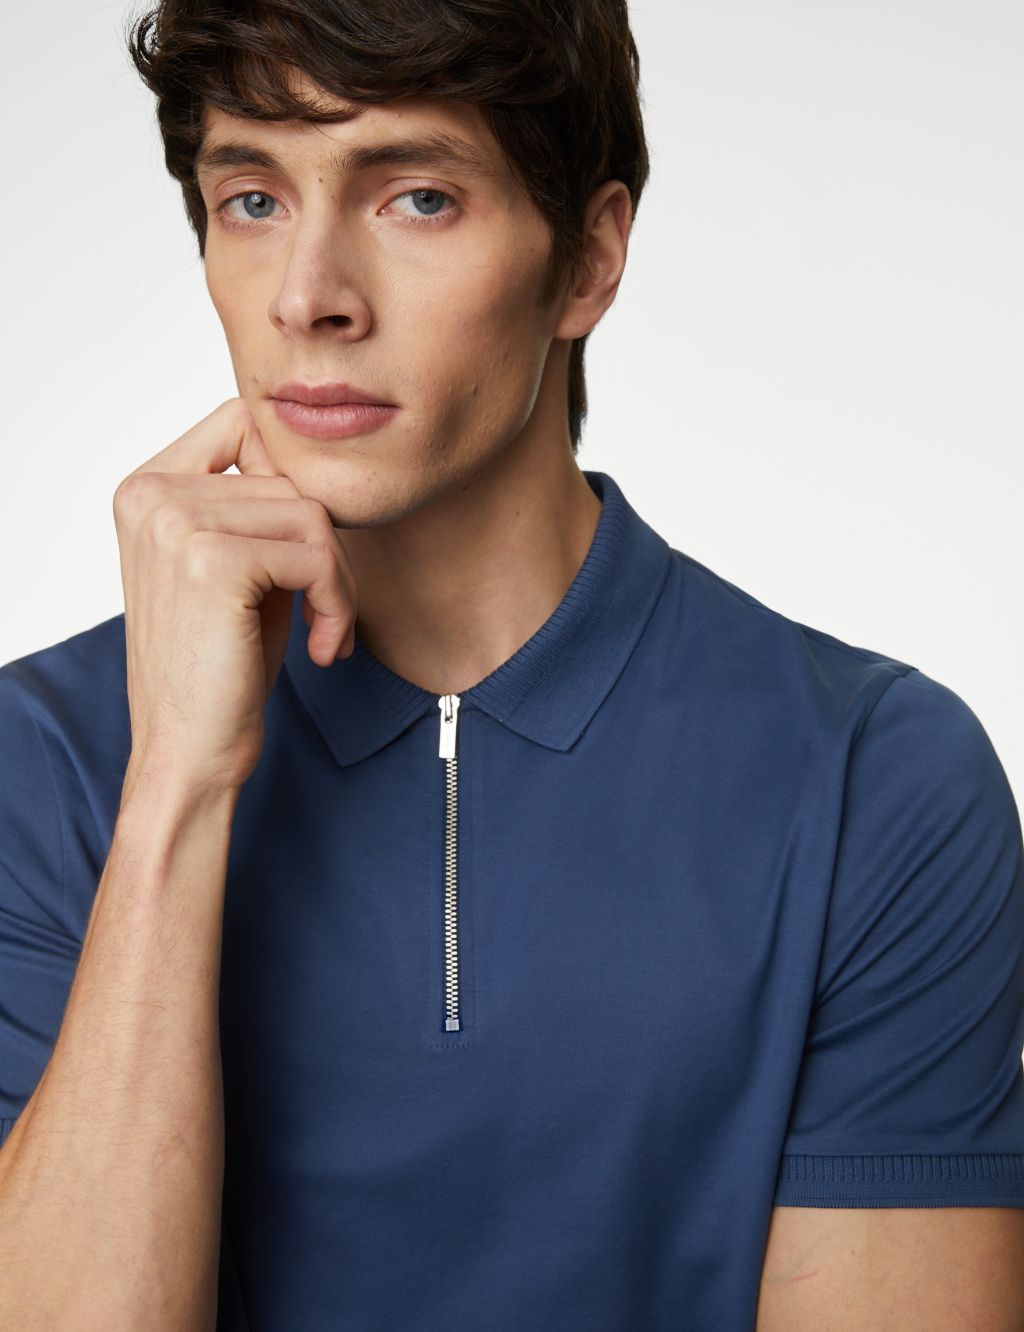 Men’s Collared-neck Polo Shirts | M&S